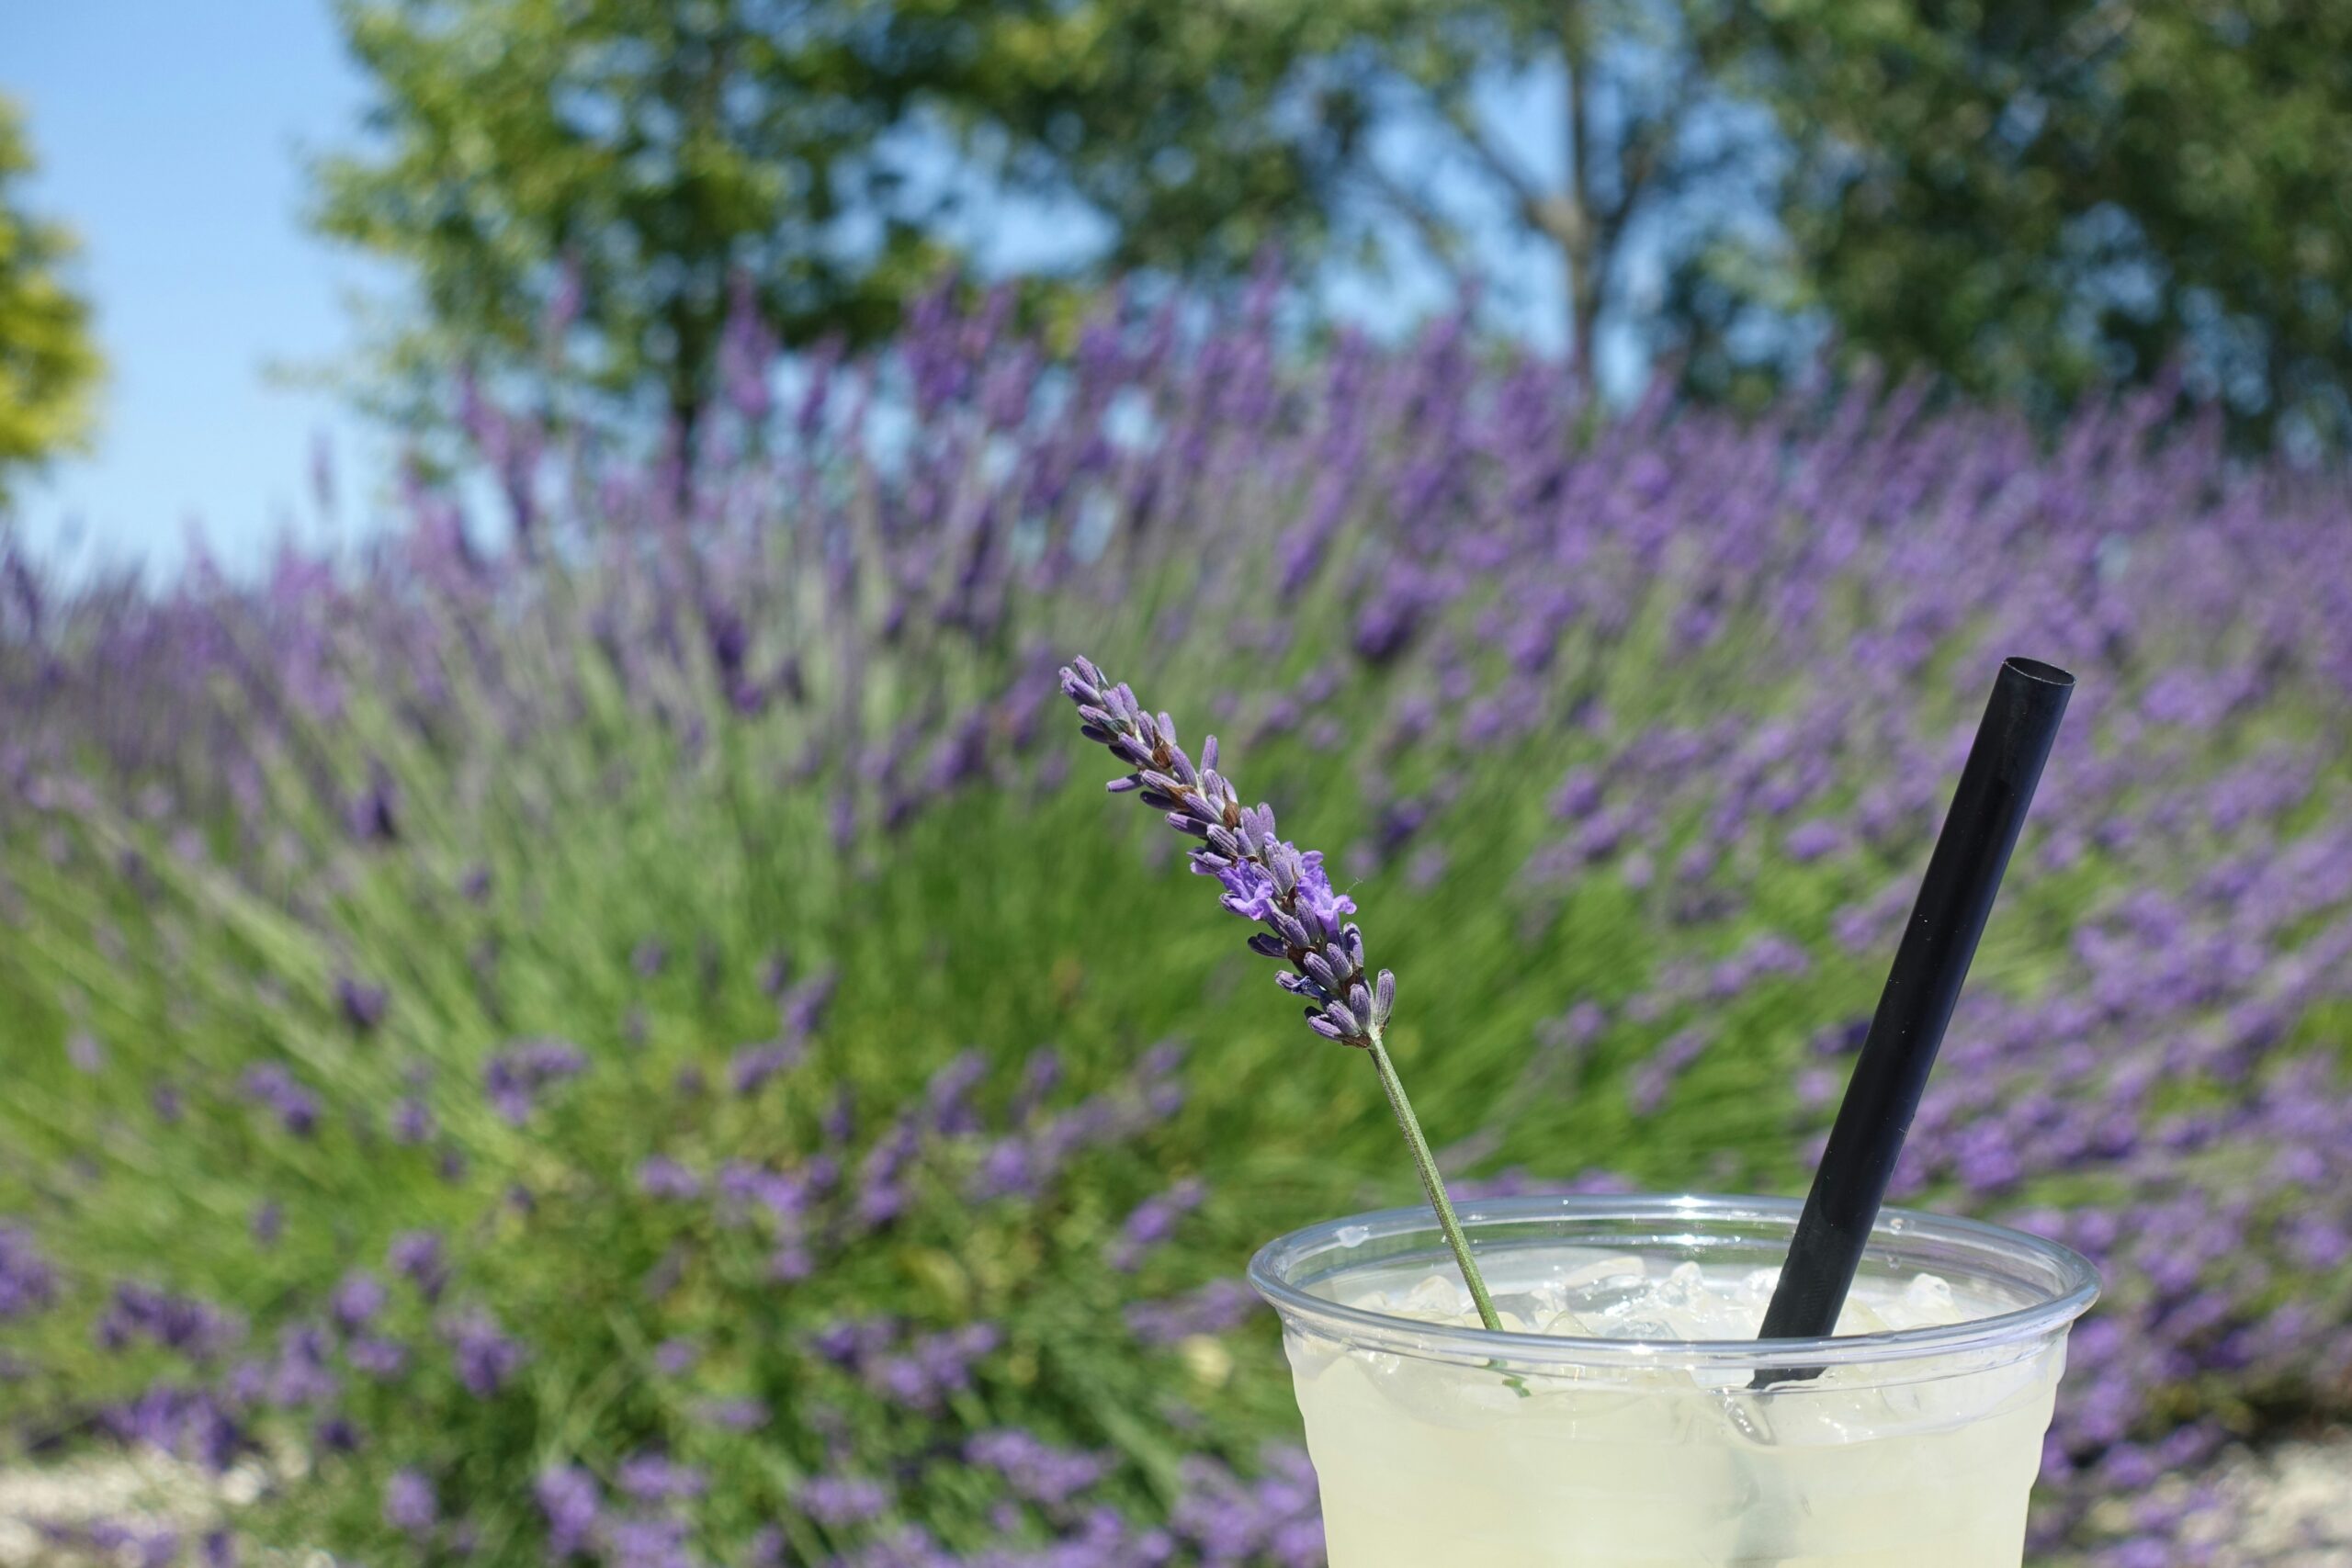 Wondering what to mix with gin? A Lavender Lemonade cocktail is the perfect drink for Spring and Summer. Pictured: Lemonade in front of a lavender field